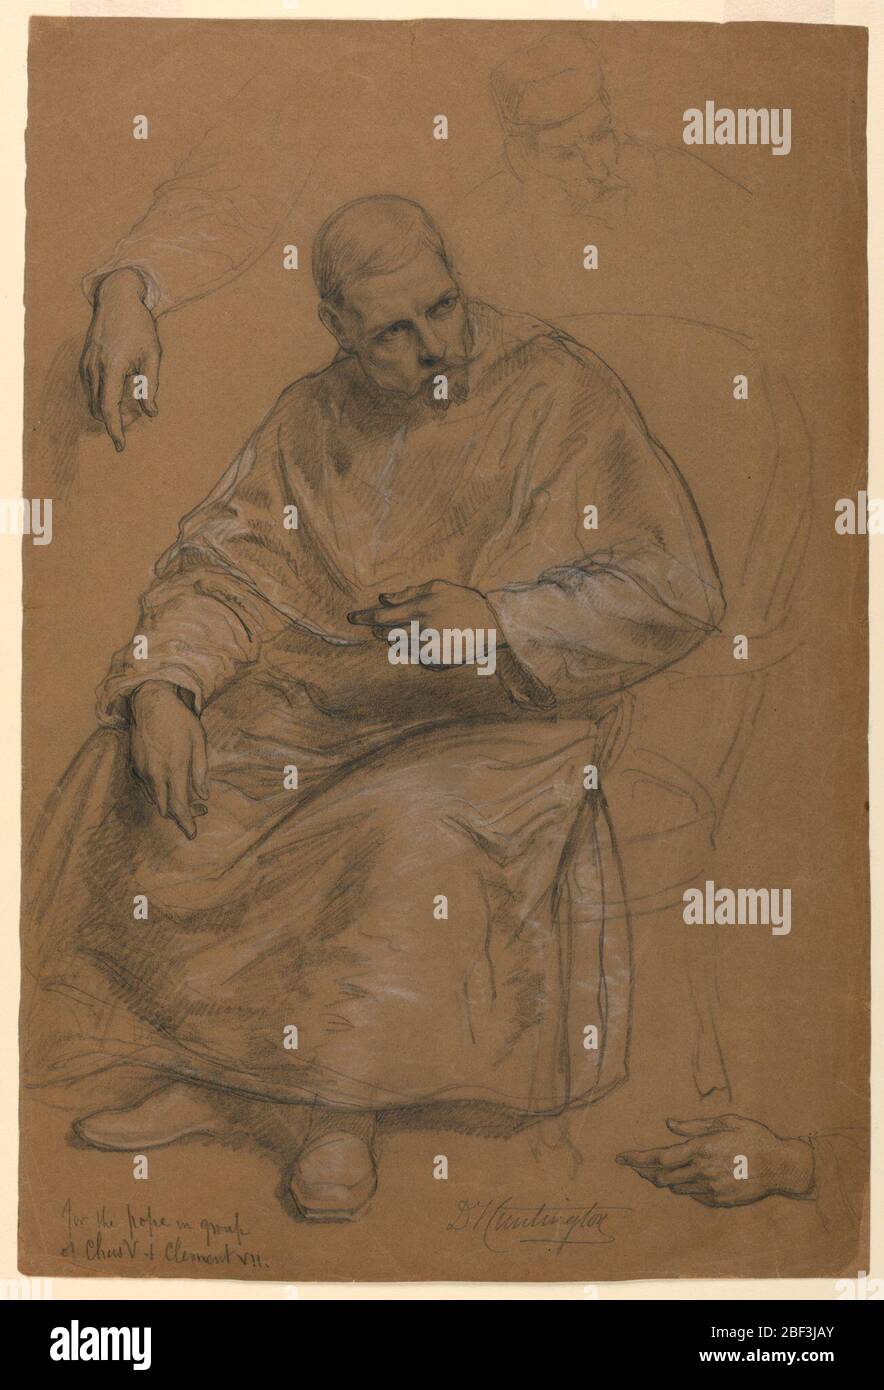 Study for Titian Showing the Entombment to Charles V and Pope Clement VII. Man with short beard and mustache, seated in a chair, head turned toward the right. Additional sketch of head, upper right. Additional studies of hands, lower right and upper left. Stock Photo